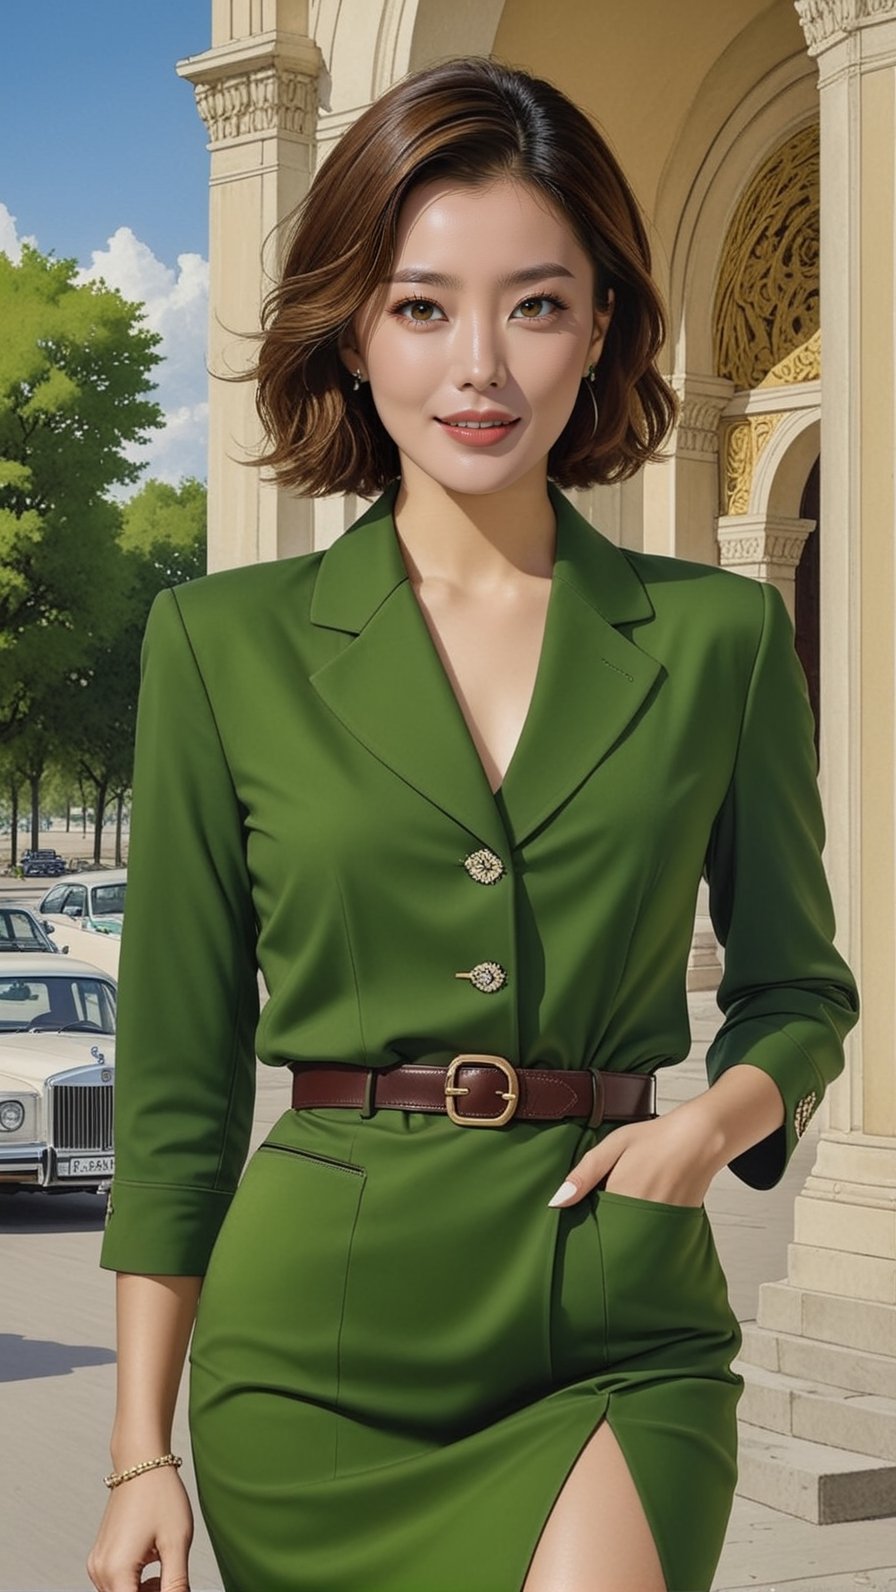 ((Hyper-Realistic)) (fullbody:1.3) photo of a girl standing,20yo,1girl,perfect female form,perfect body proportion,perfect anatomy,detailed exquisite symmetric face,detailed soft shiny skin,glossy lips,smile, mesmerizing,detailed disheveled short hair,(elegant jacket,shirt and skirt),(Modern Green,Hazel Brown,Cream color),(beautiful knees and highheels:1.6)
BREAK
(detailed realistic backdrop of Triumphal Arch in Tiras Paul,Transist,the eastern part of Moldova,distant view:1.3)
BREAK
rule of thirds,perfect composition,studio photo,trending on artstation,(Masterpiece,Best quality,32k,UHD:1.5),(sharp focus,high contrast,HDR,ray tracing,hyper-detailed,intricate details,ultra-realistic,award-winning photo,kodachrome 800:1.4),(cinematic lighting:1.2),by Karol Bak,Gustav Klimt,Gerald Brom and Hayao Miyazaki,
real_booster,art_booster,photo_b00ster,kim youjung,kim_heesun